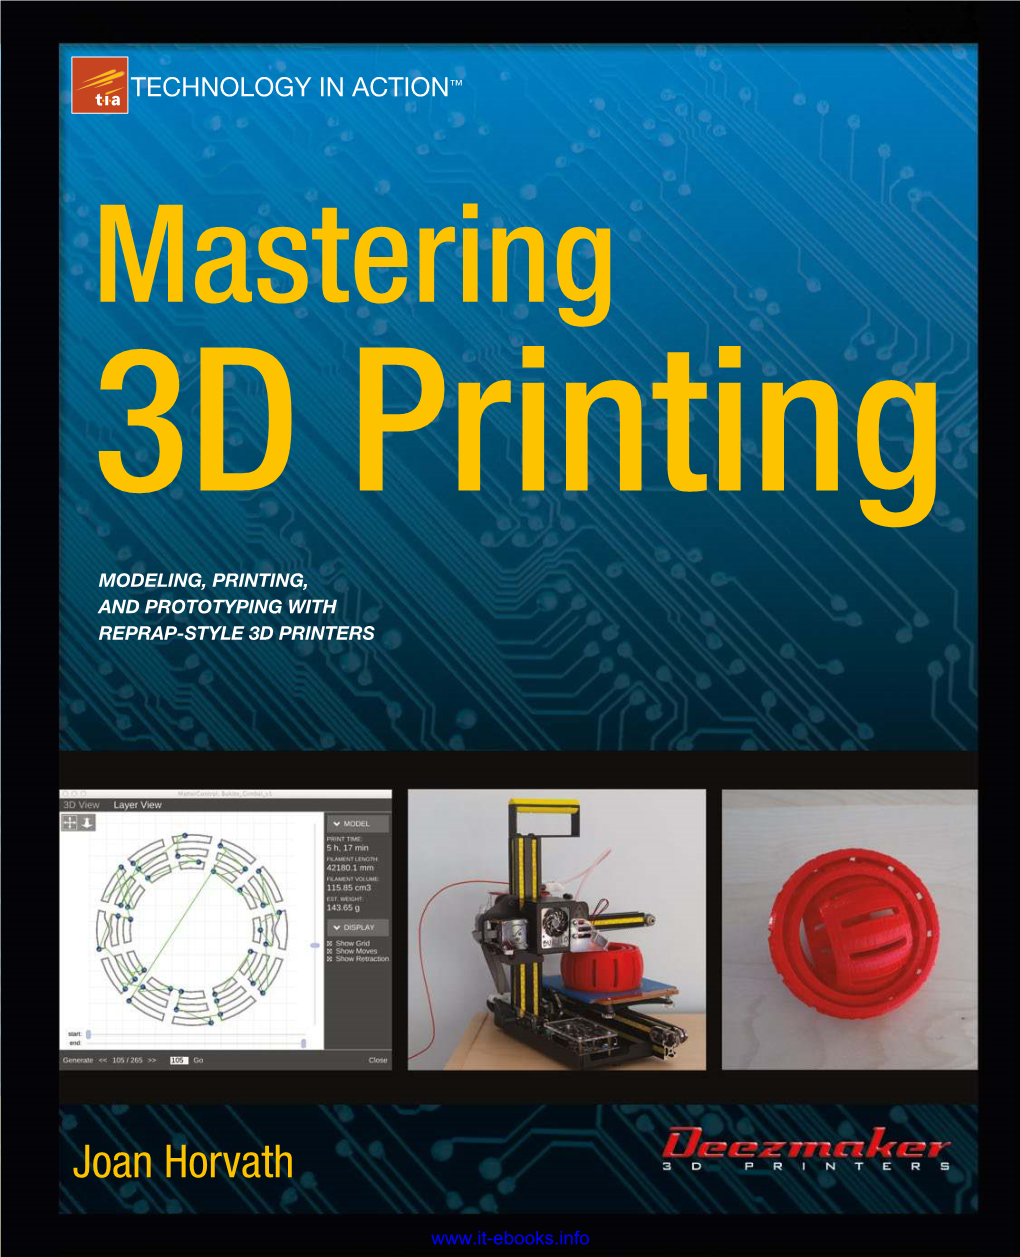 Mastering 3D Printing Mastering 3D Printing • • • MODELING, PRINTING, • and PROTOTYPING with • REPRAP-STYLE 3D PRINTERS •